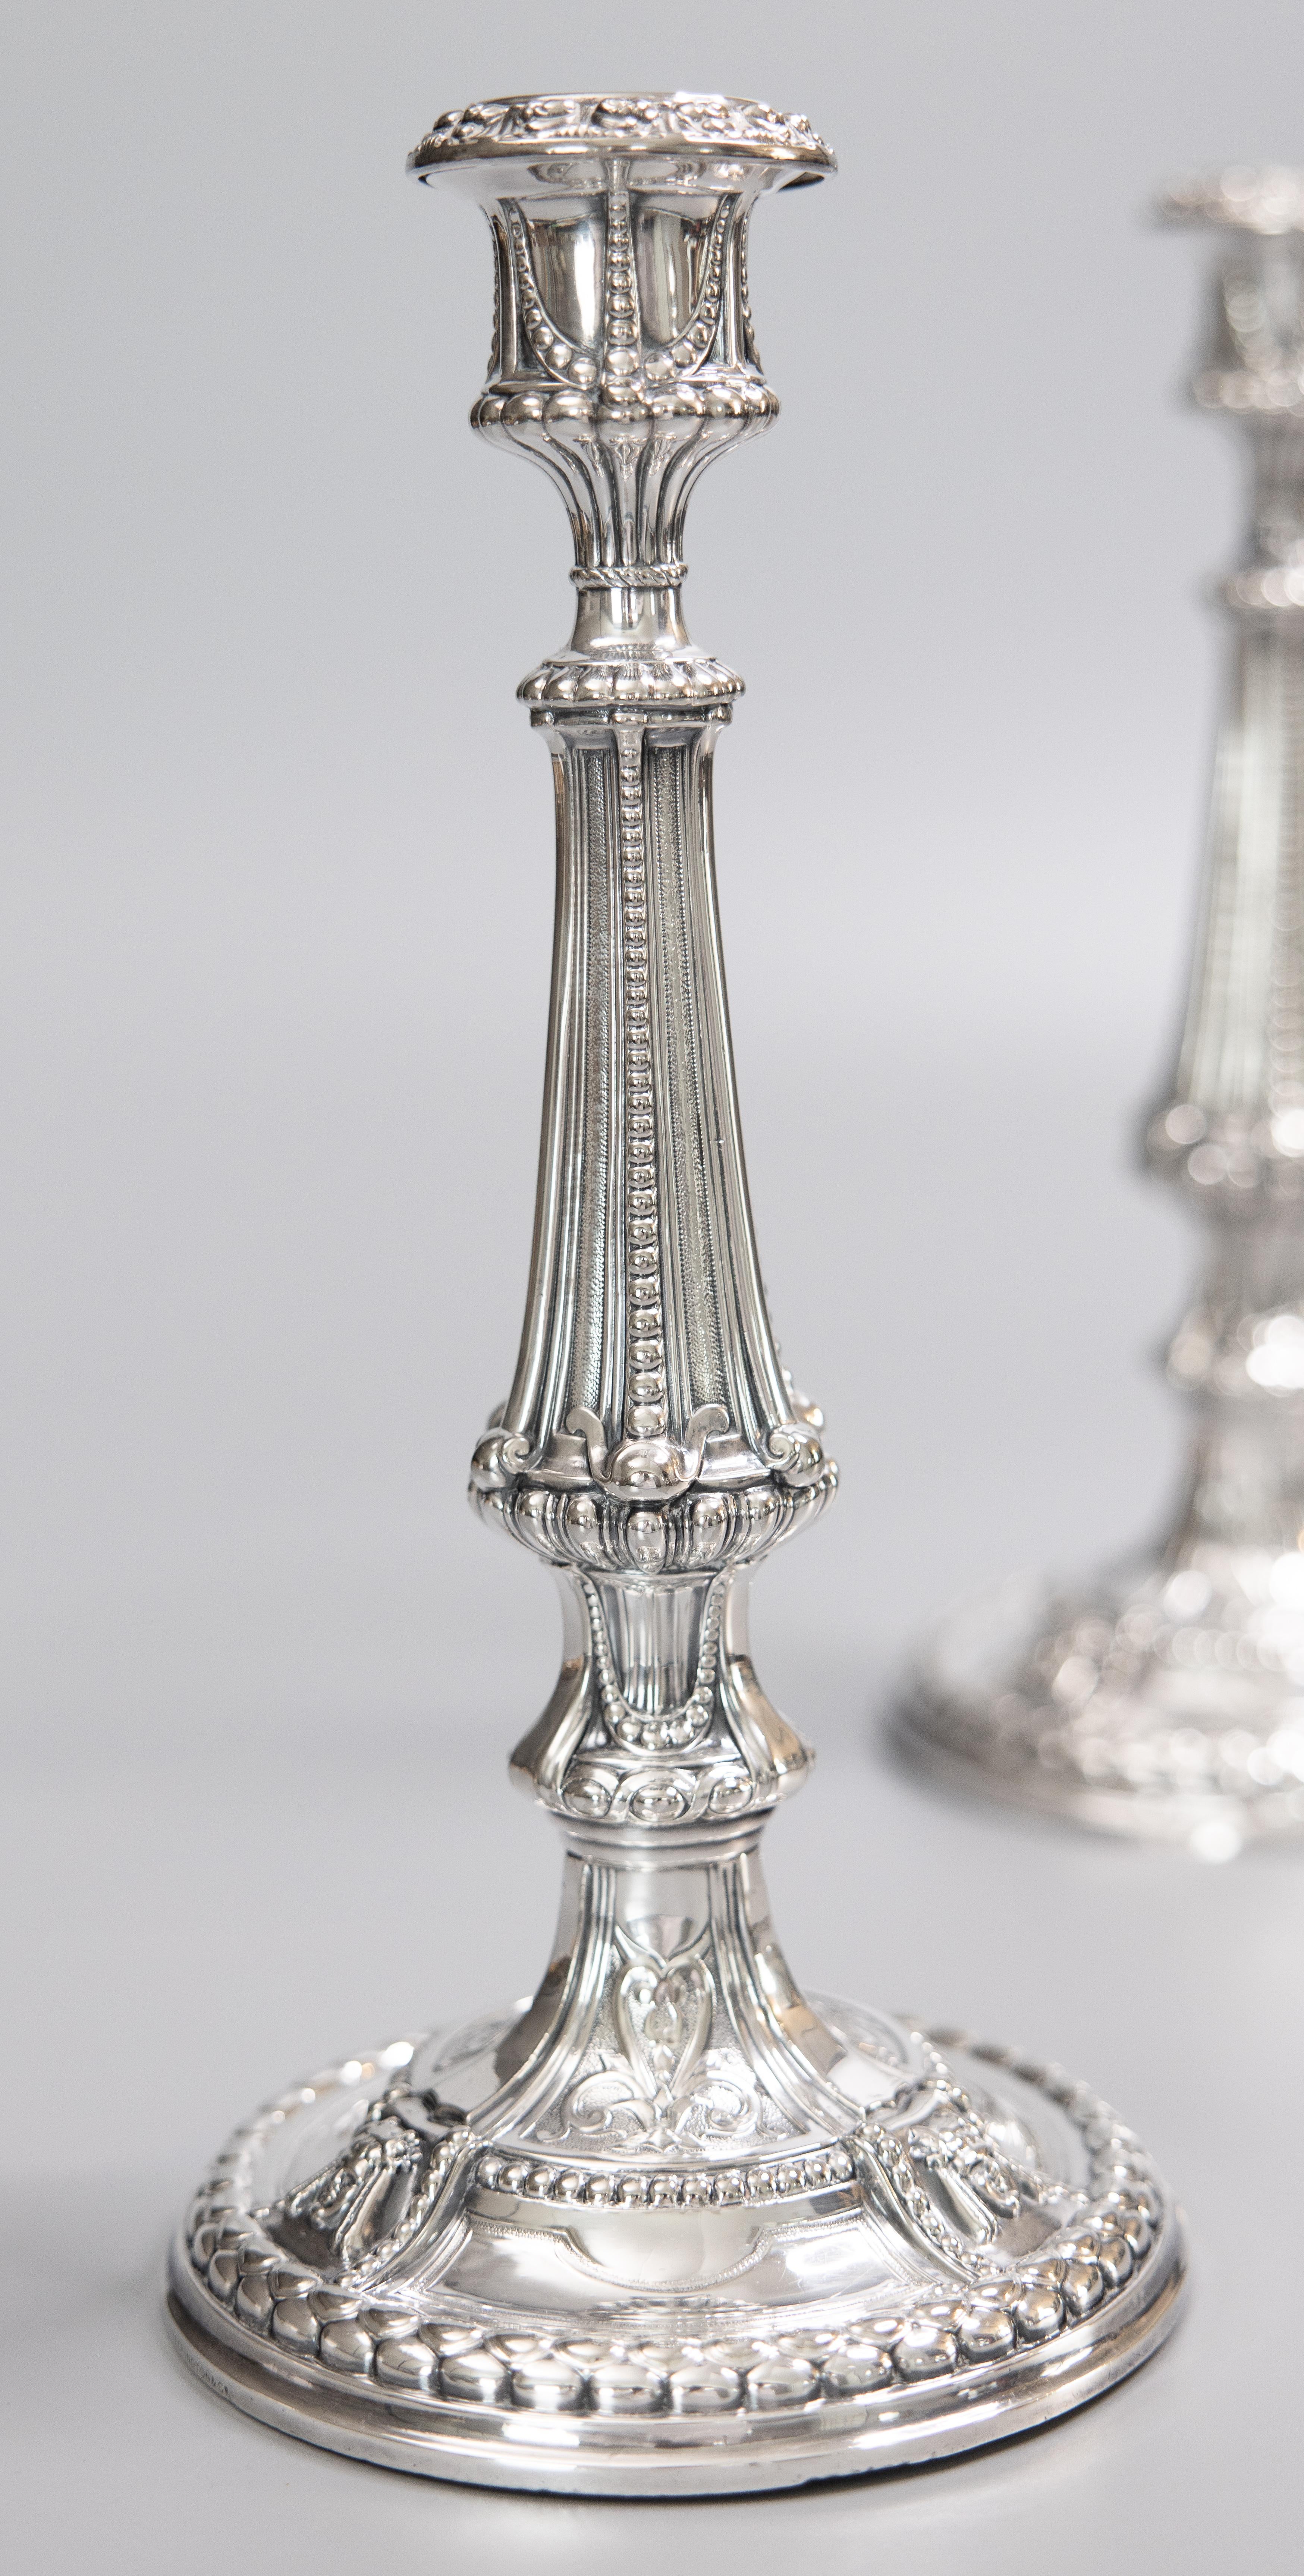 A stunning pair of antique English silverplated candlesticks by Elkington & Co, Birmingham, England, dated 1899. Marked 